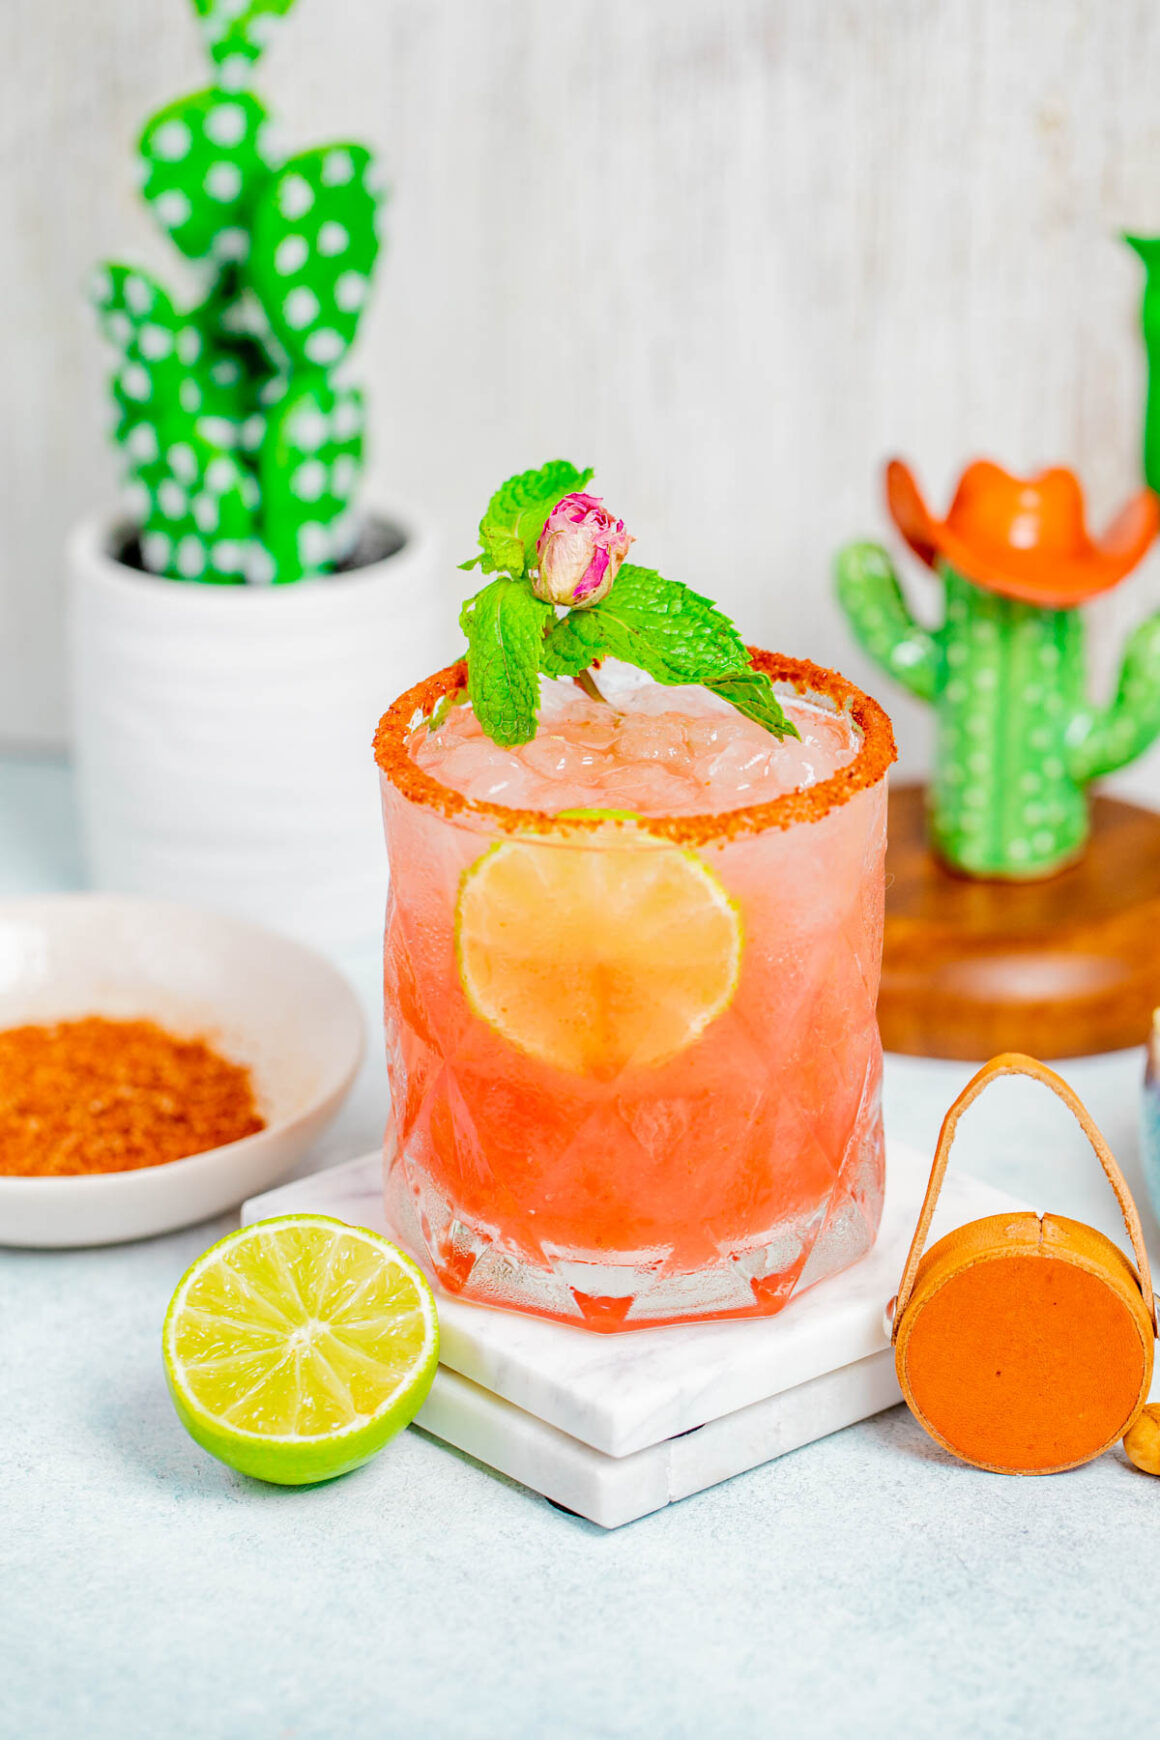 The Guava Margarita is a refreshing, tropical cocktail that sums up the essence of a sunny getaway.